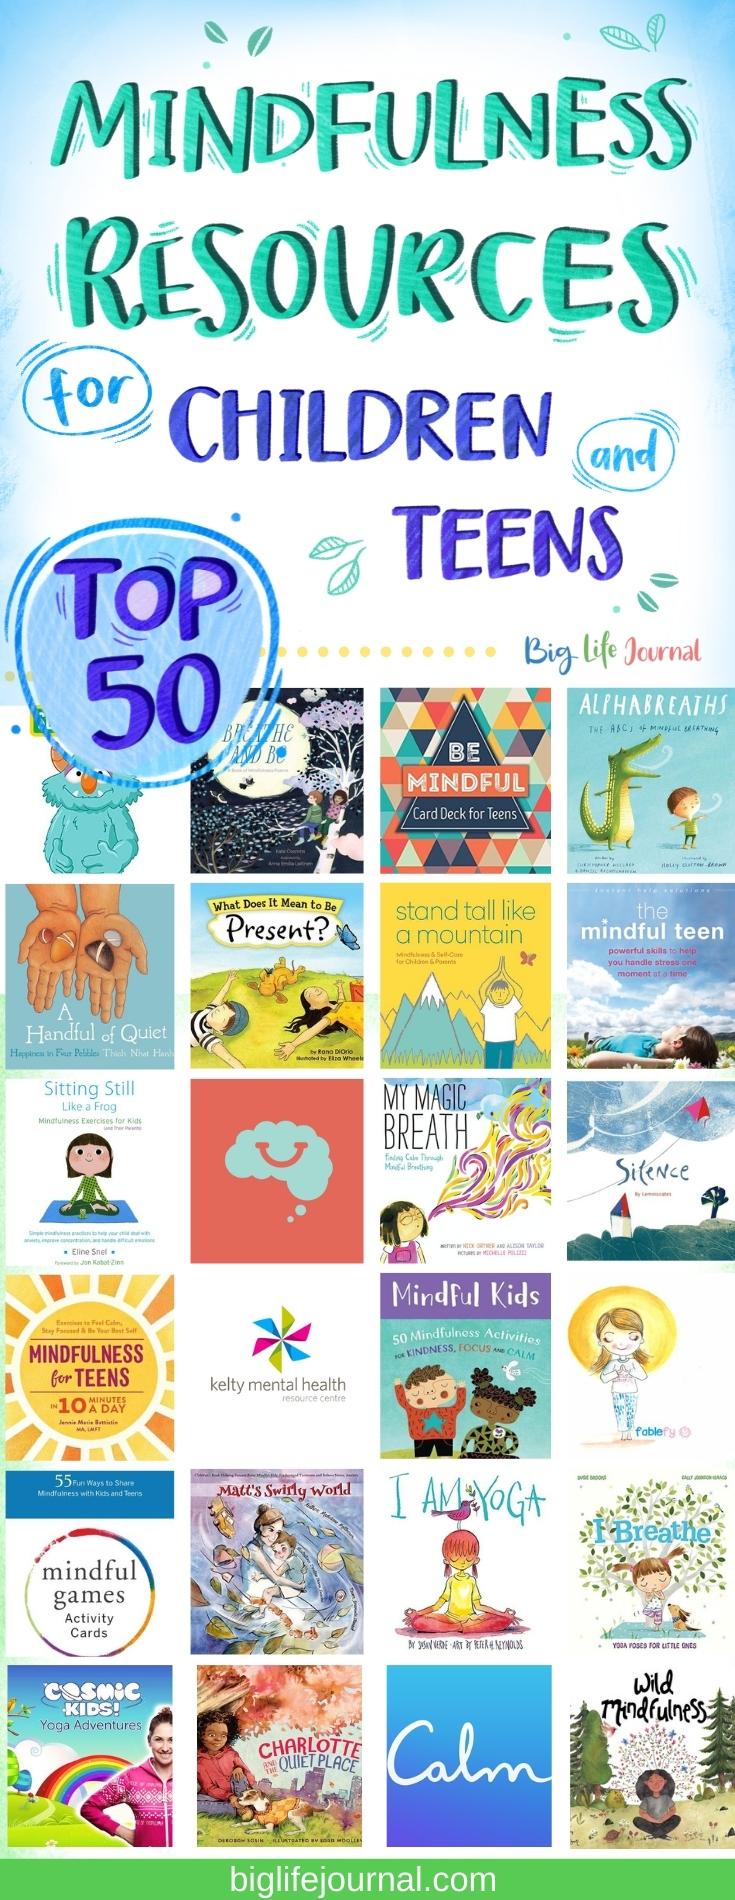 Mindfulness Resources for Children & Teens